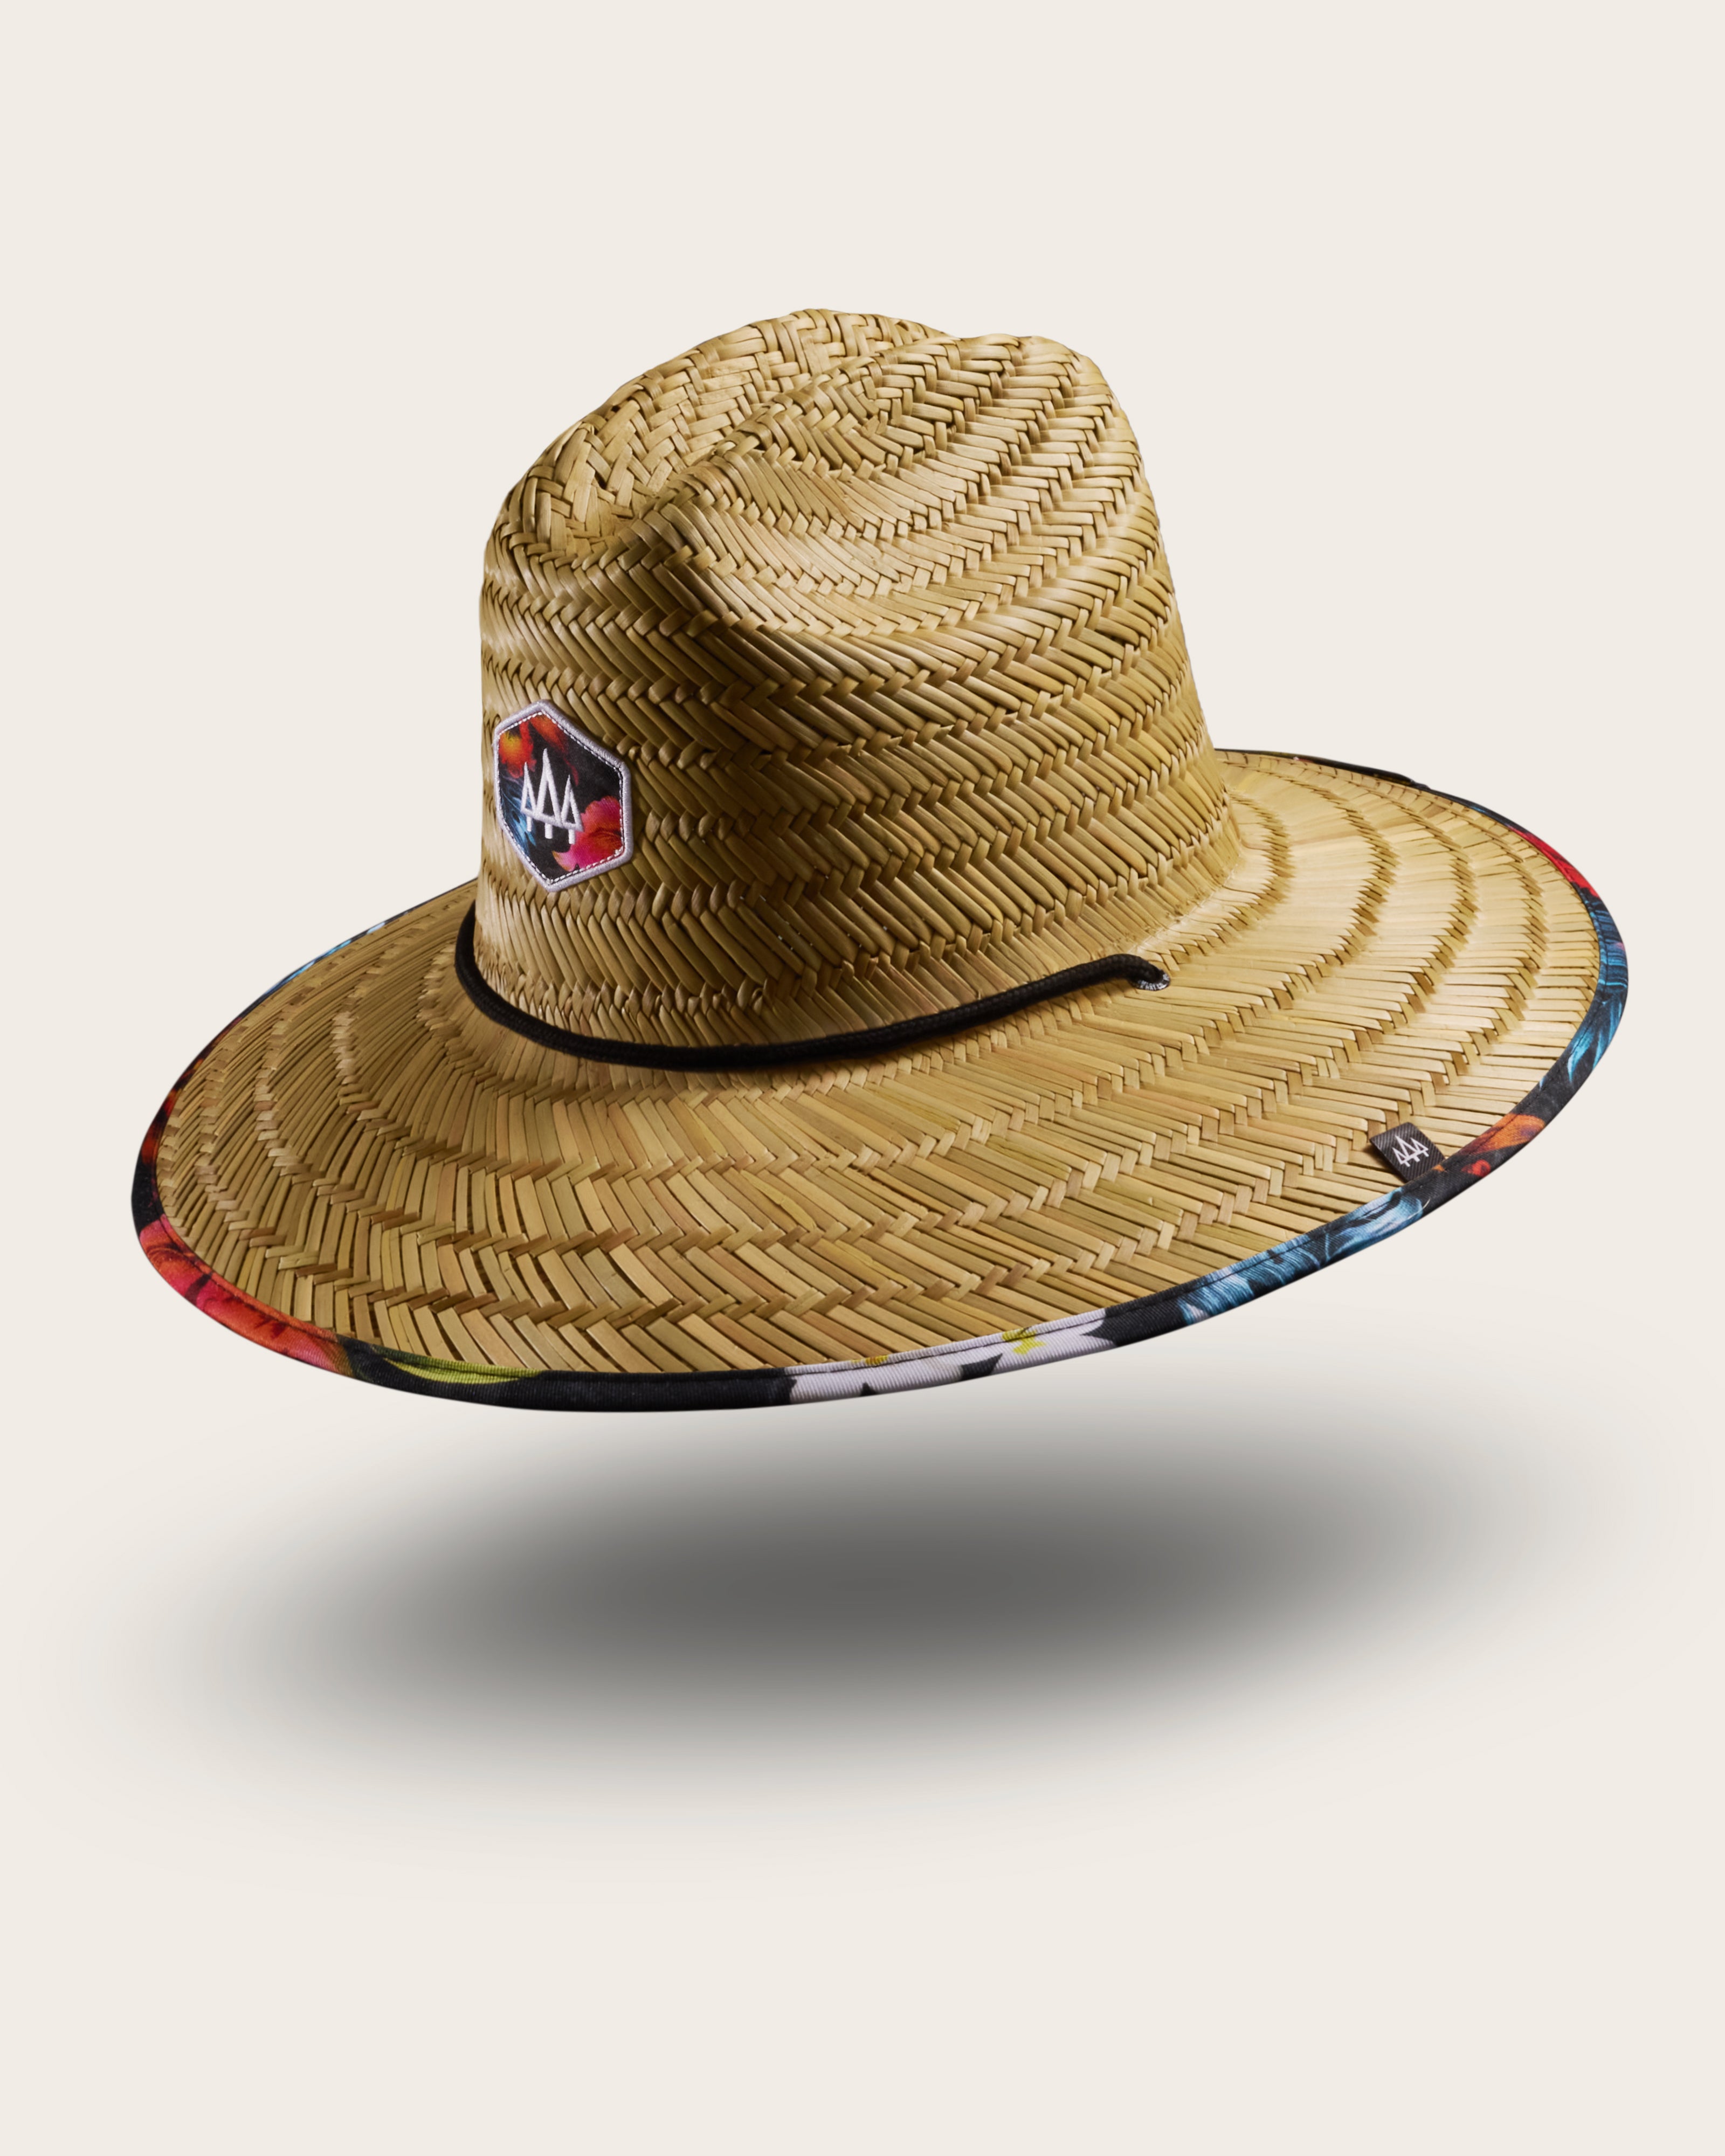 Hemlock Kailua straw lifeguard hat with hawaiian floral pattern with patch